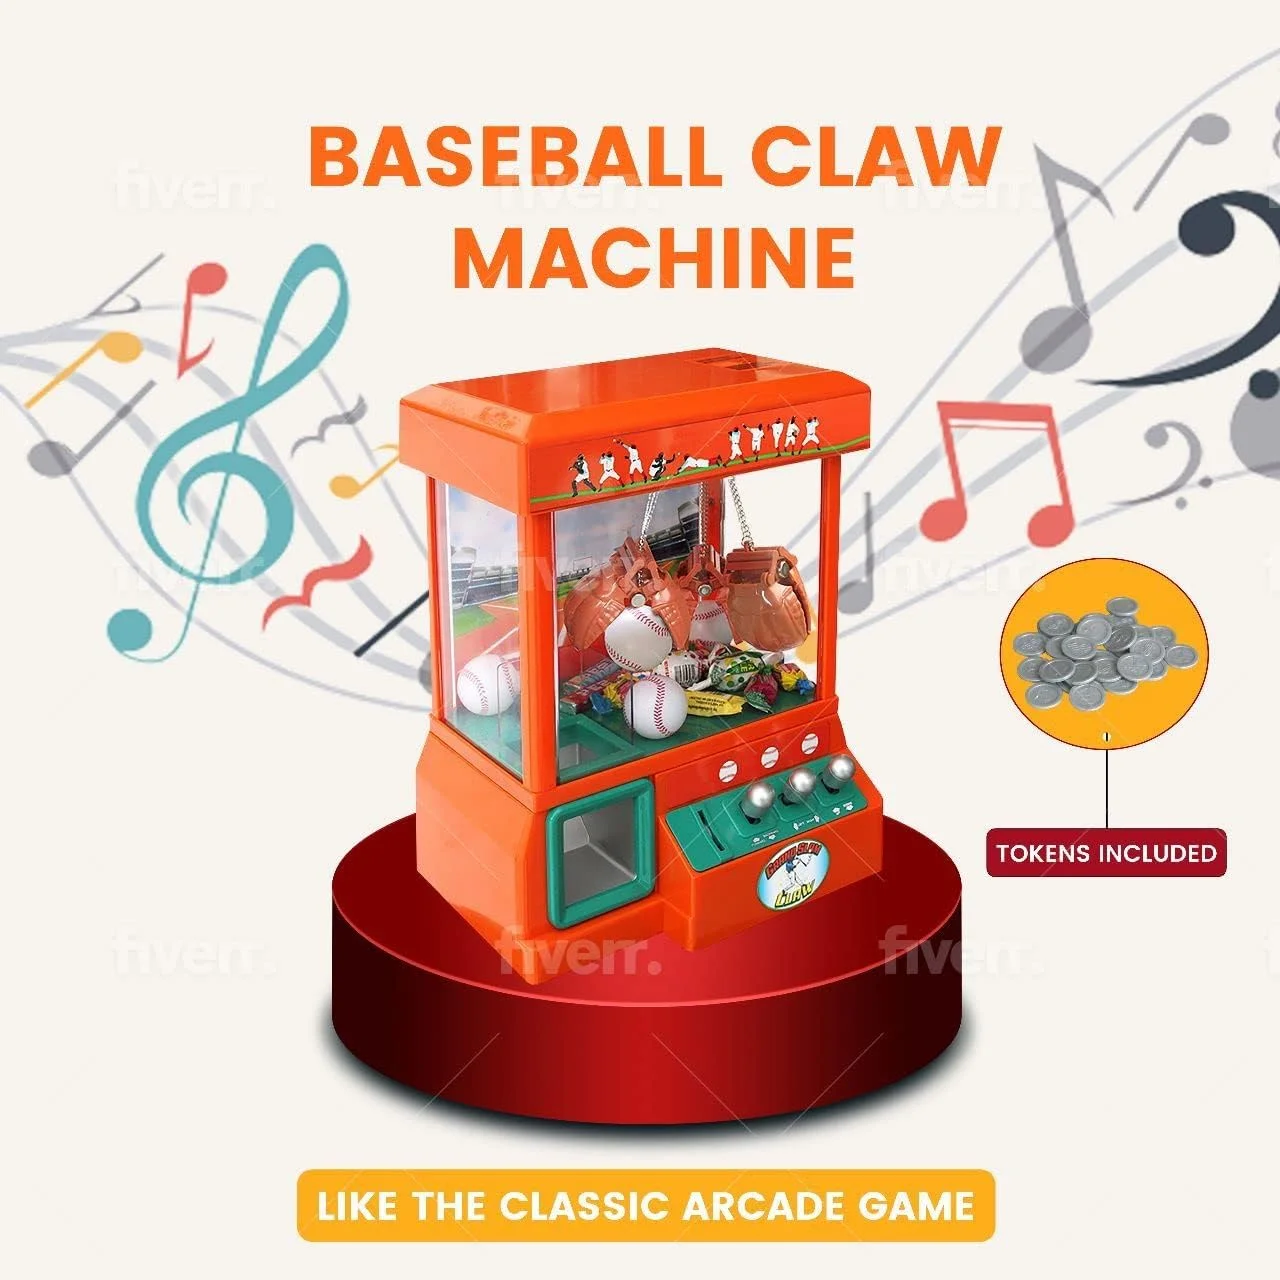 Baseball Claw Machine Game Review